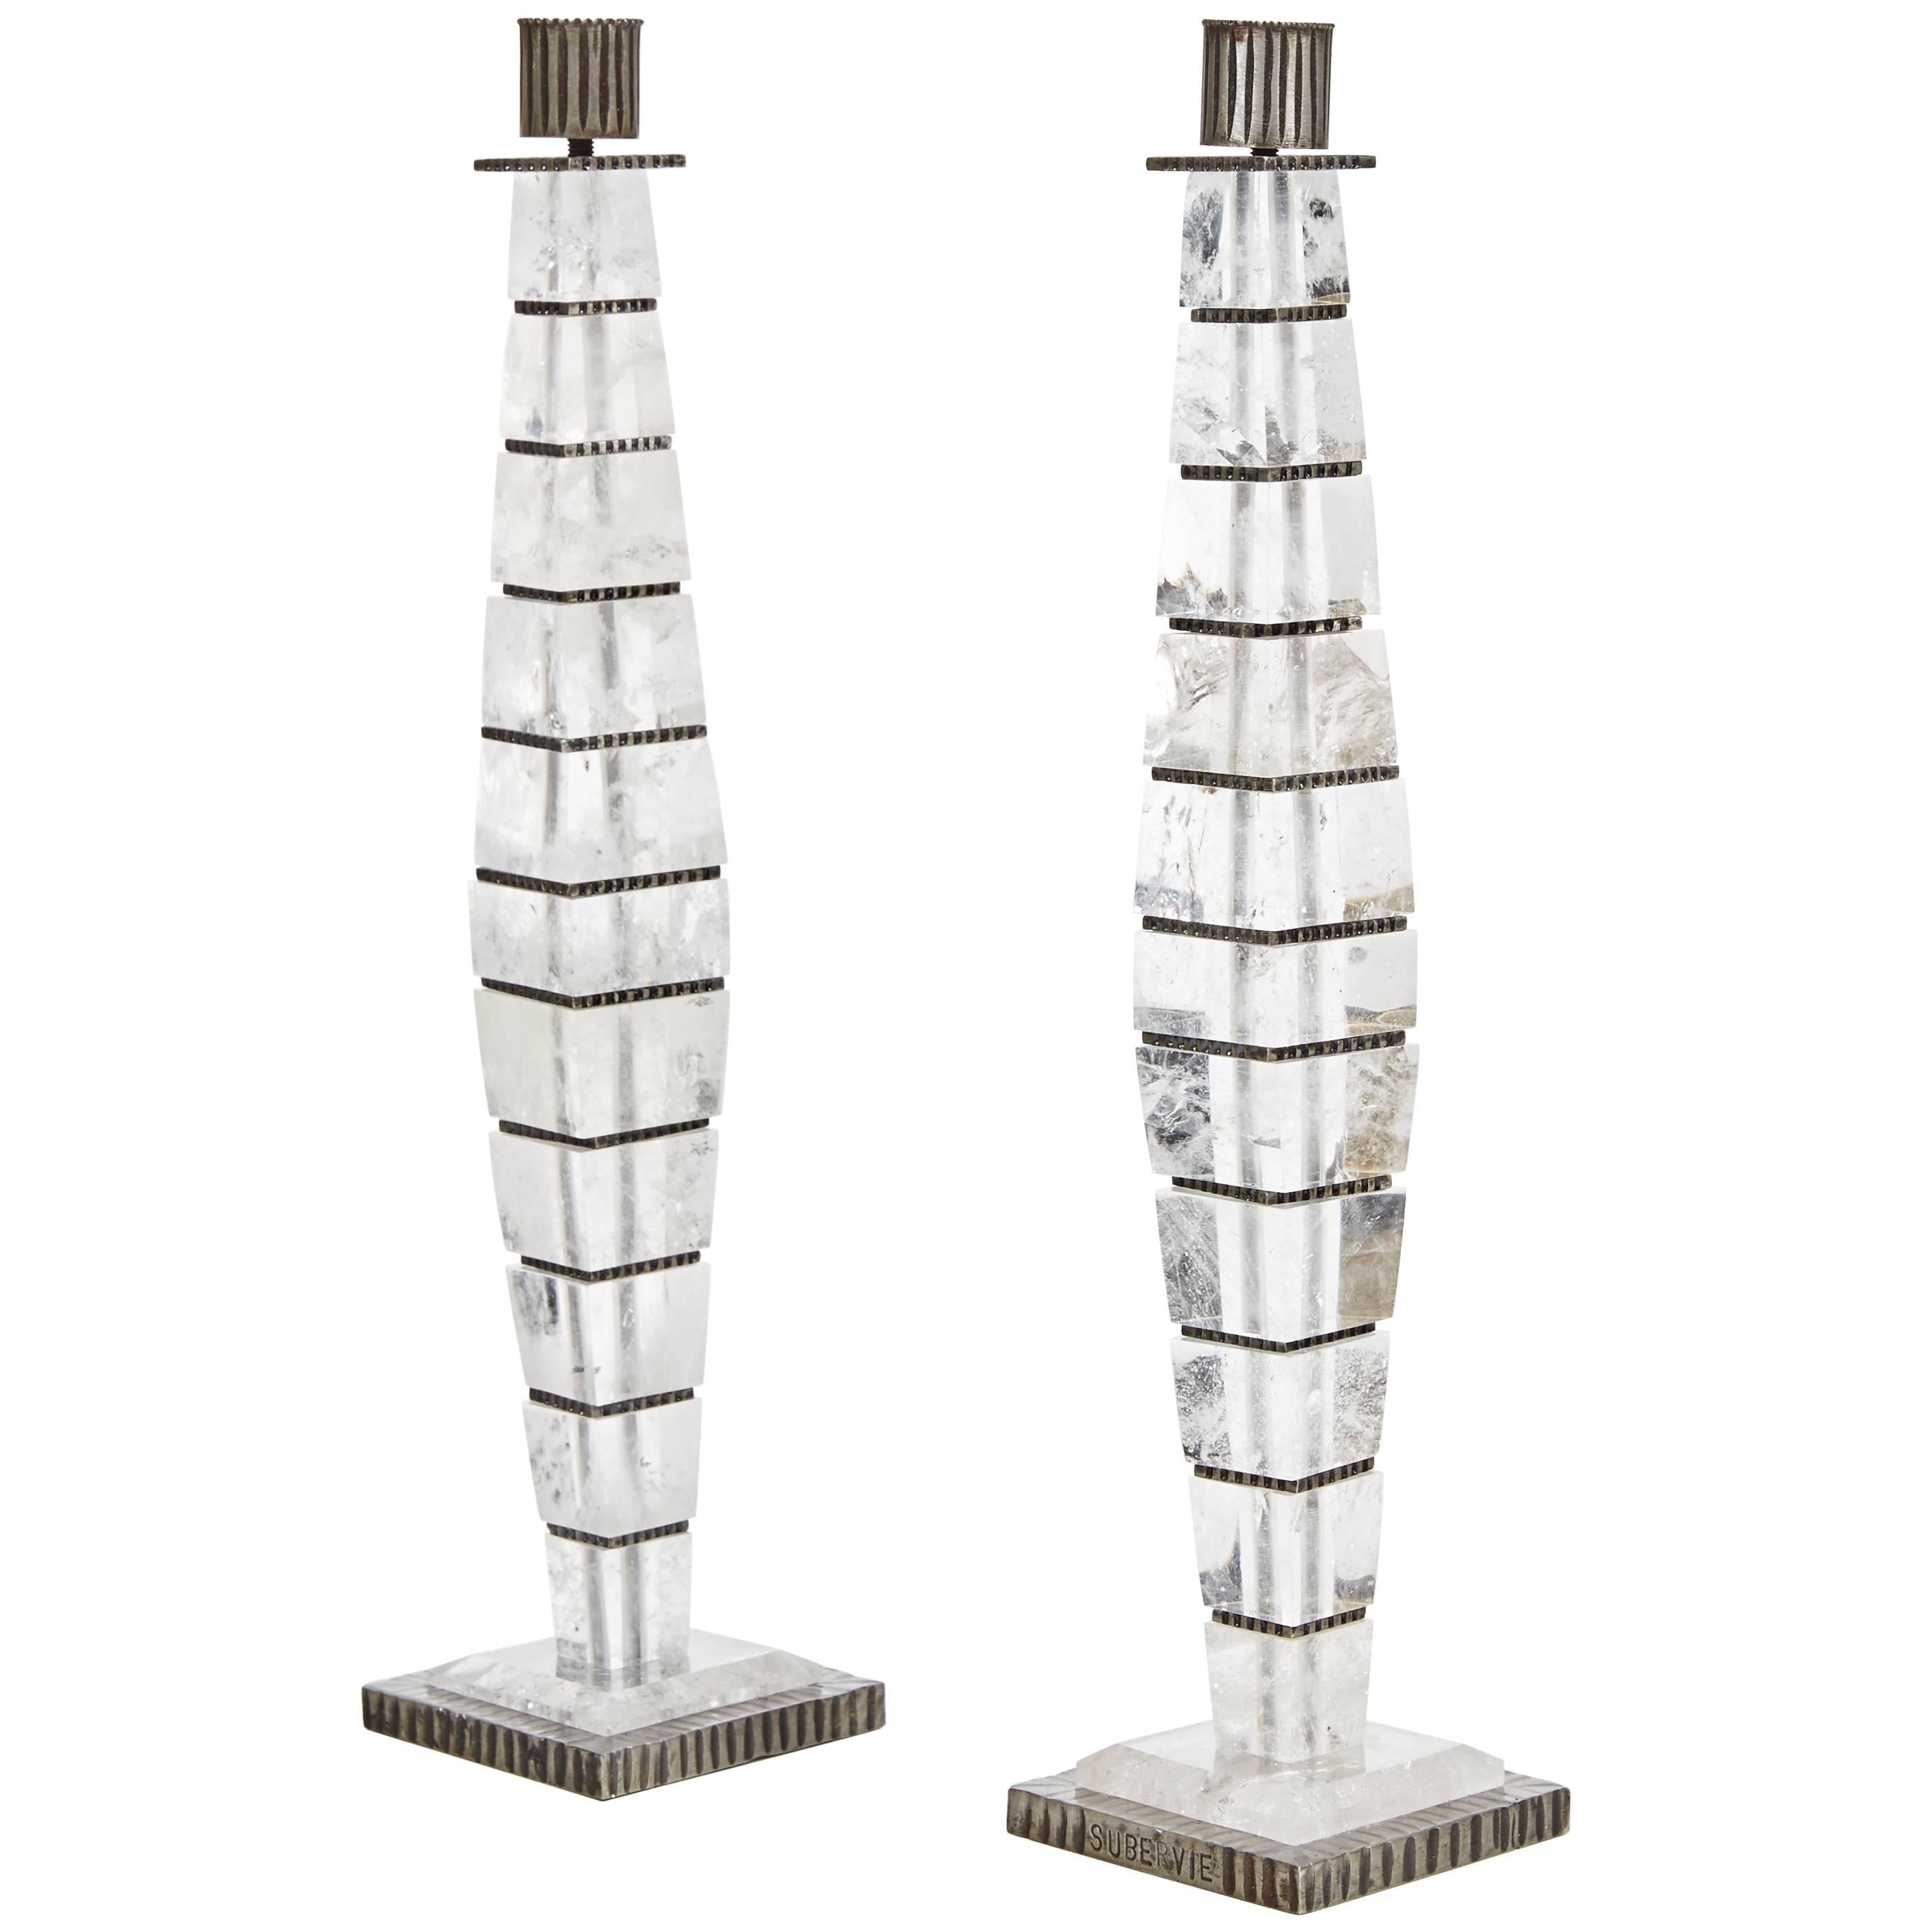 A Pair of Square Candlesticks by Sylvain Subervie, 2003